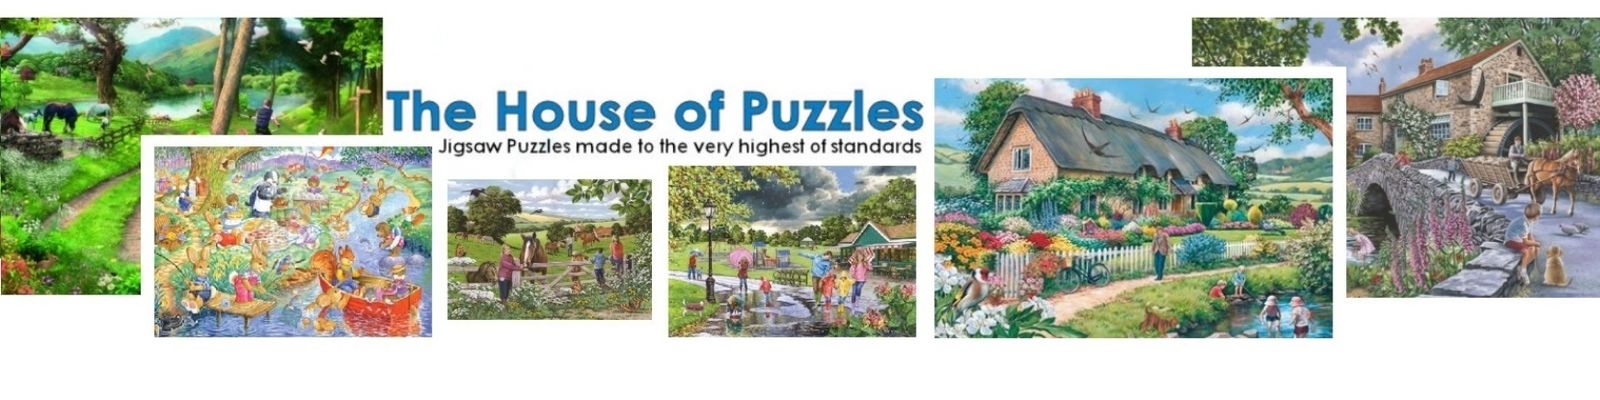 0.The House of Puzzles2.jpg